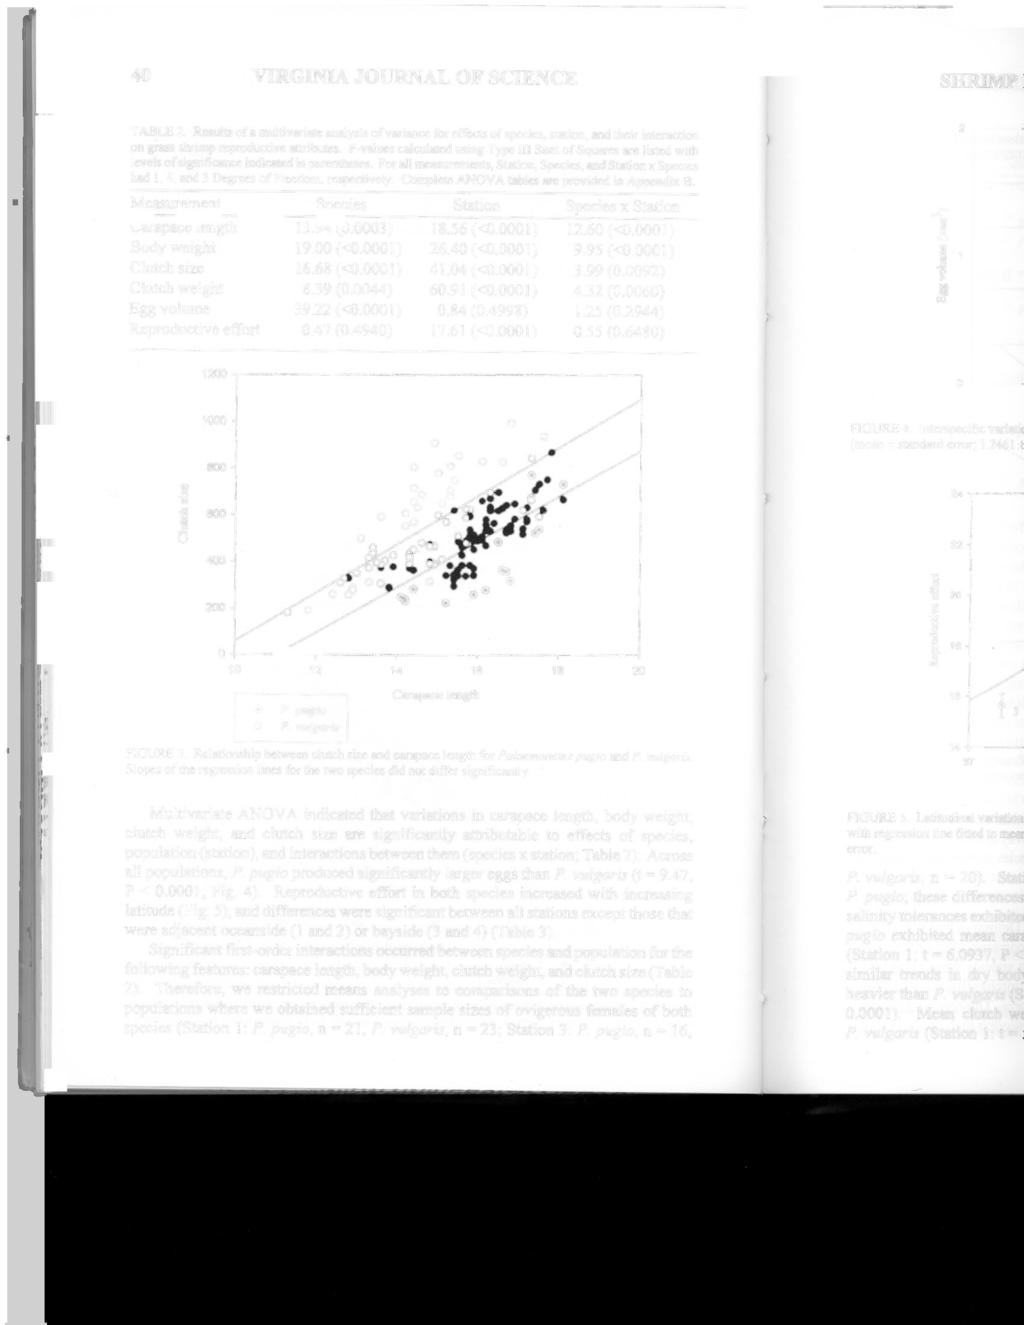 40 VIRGINIA JOURNAL OF SCIENCE TABLE 2. Results of a multivariate analysis of variance for effects of species, station, and their interaction on grass shrimp reproductive attributes.